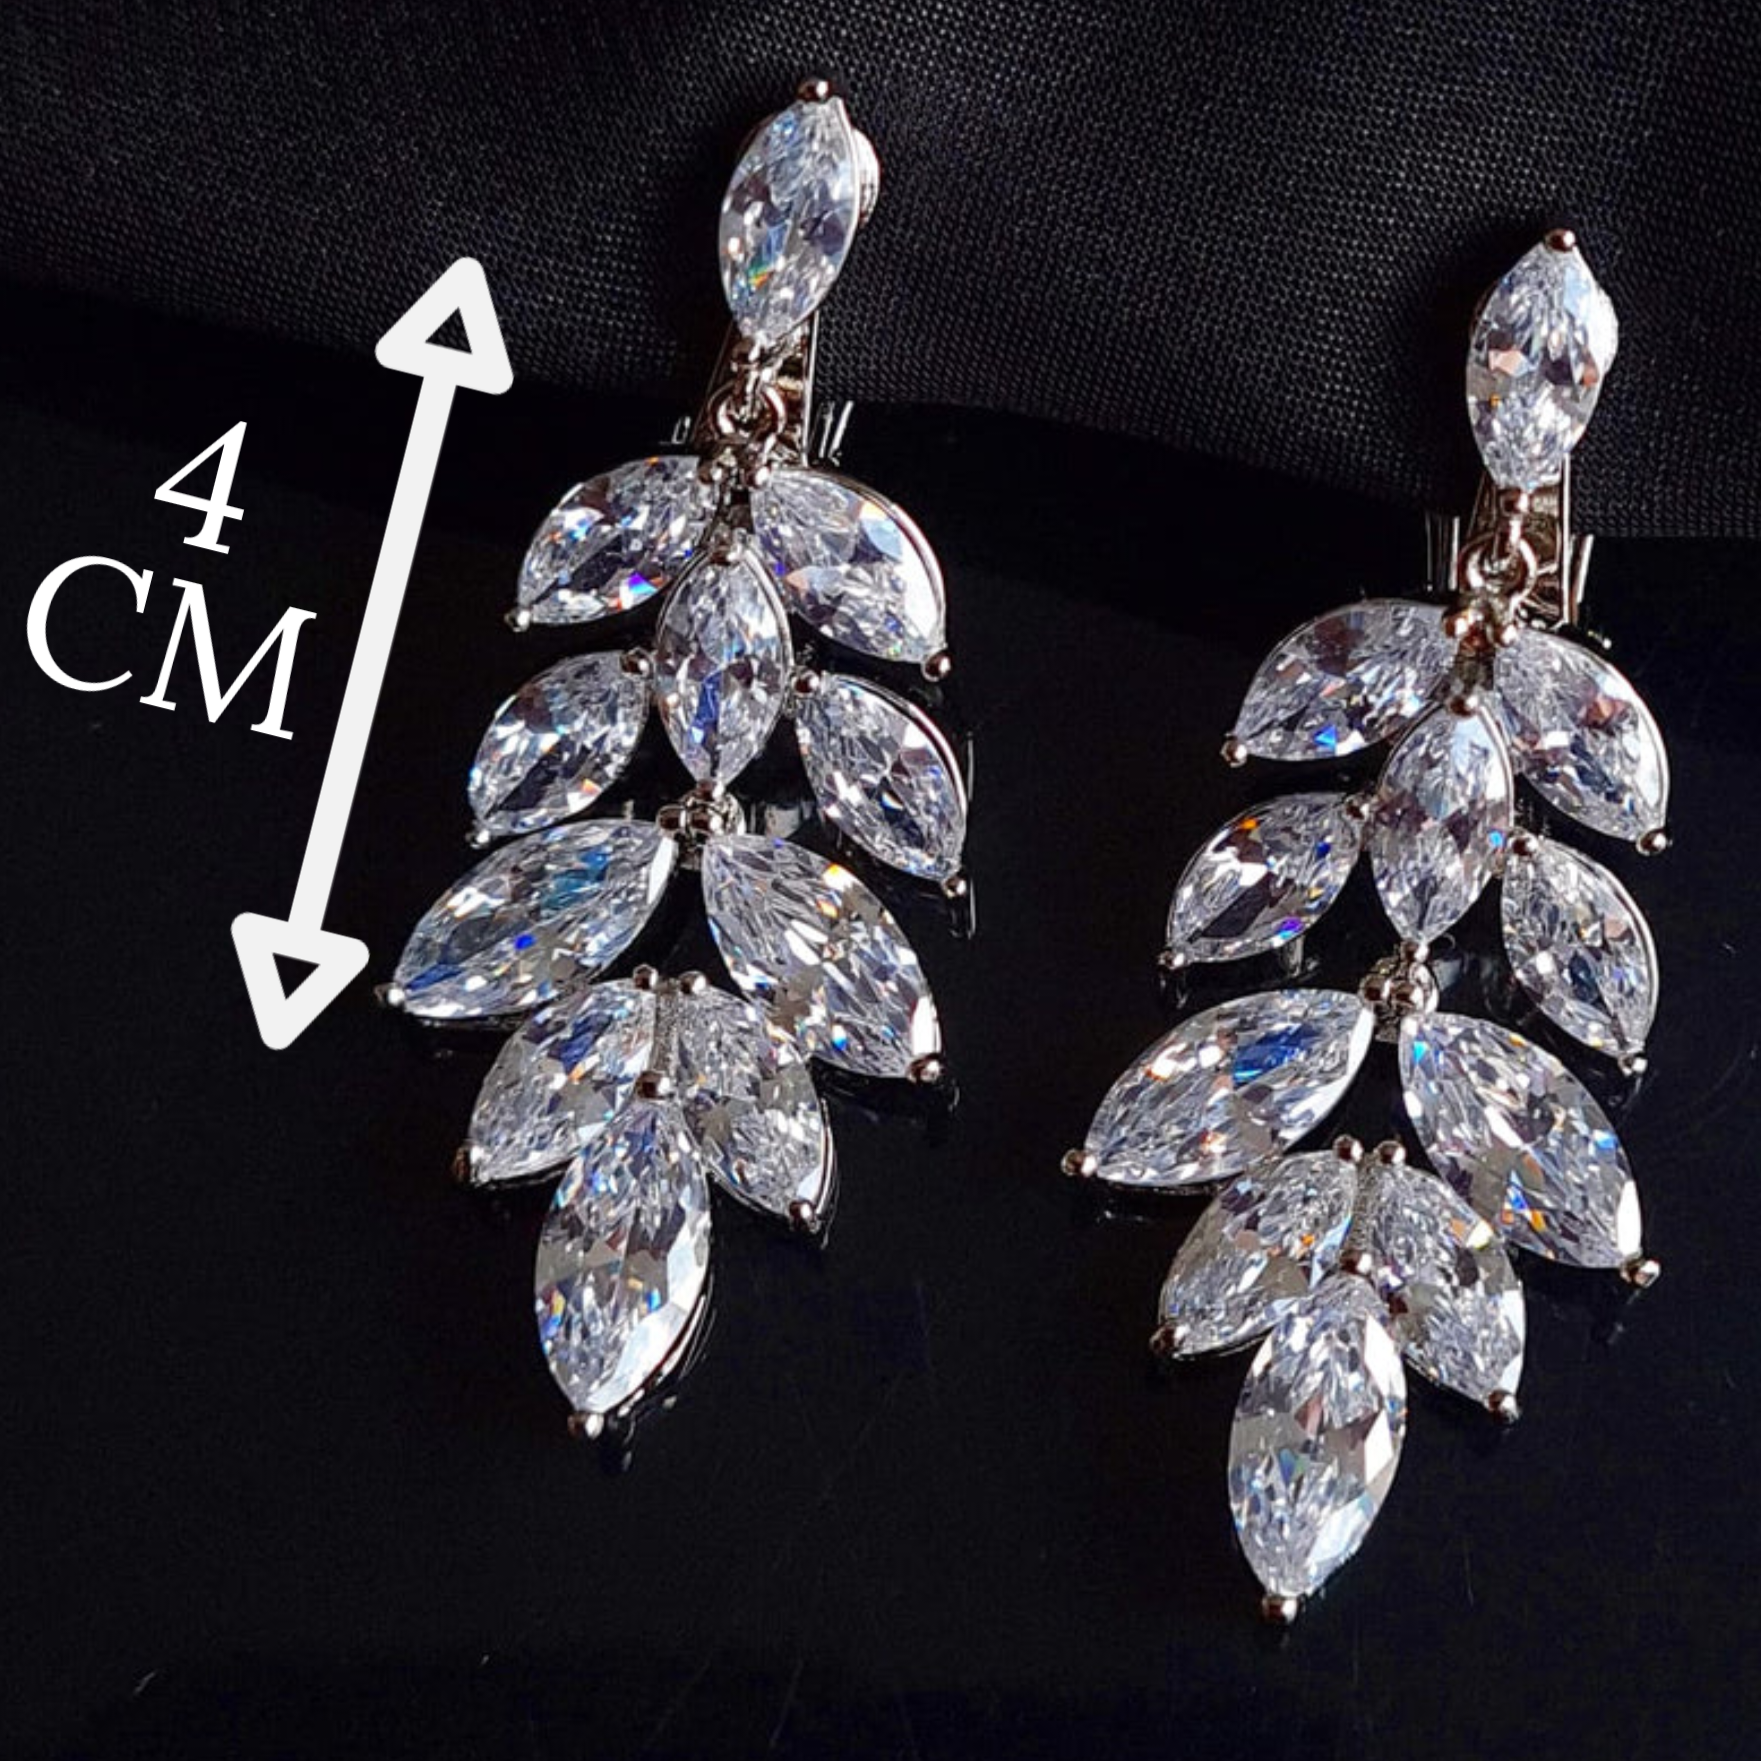 A pair of silver earrings with cubic zirconia. The earrings are simple in design and the cubic zirconia are sparkling. The earrings are a perfect accessory for a special occasion or a gift for a loved one. with measures.